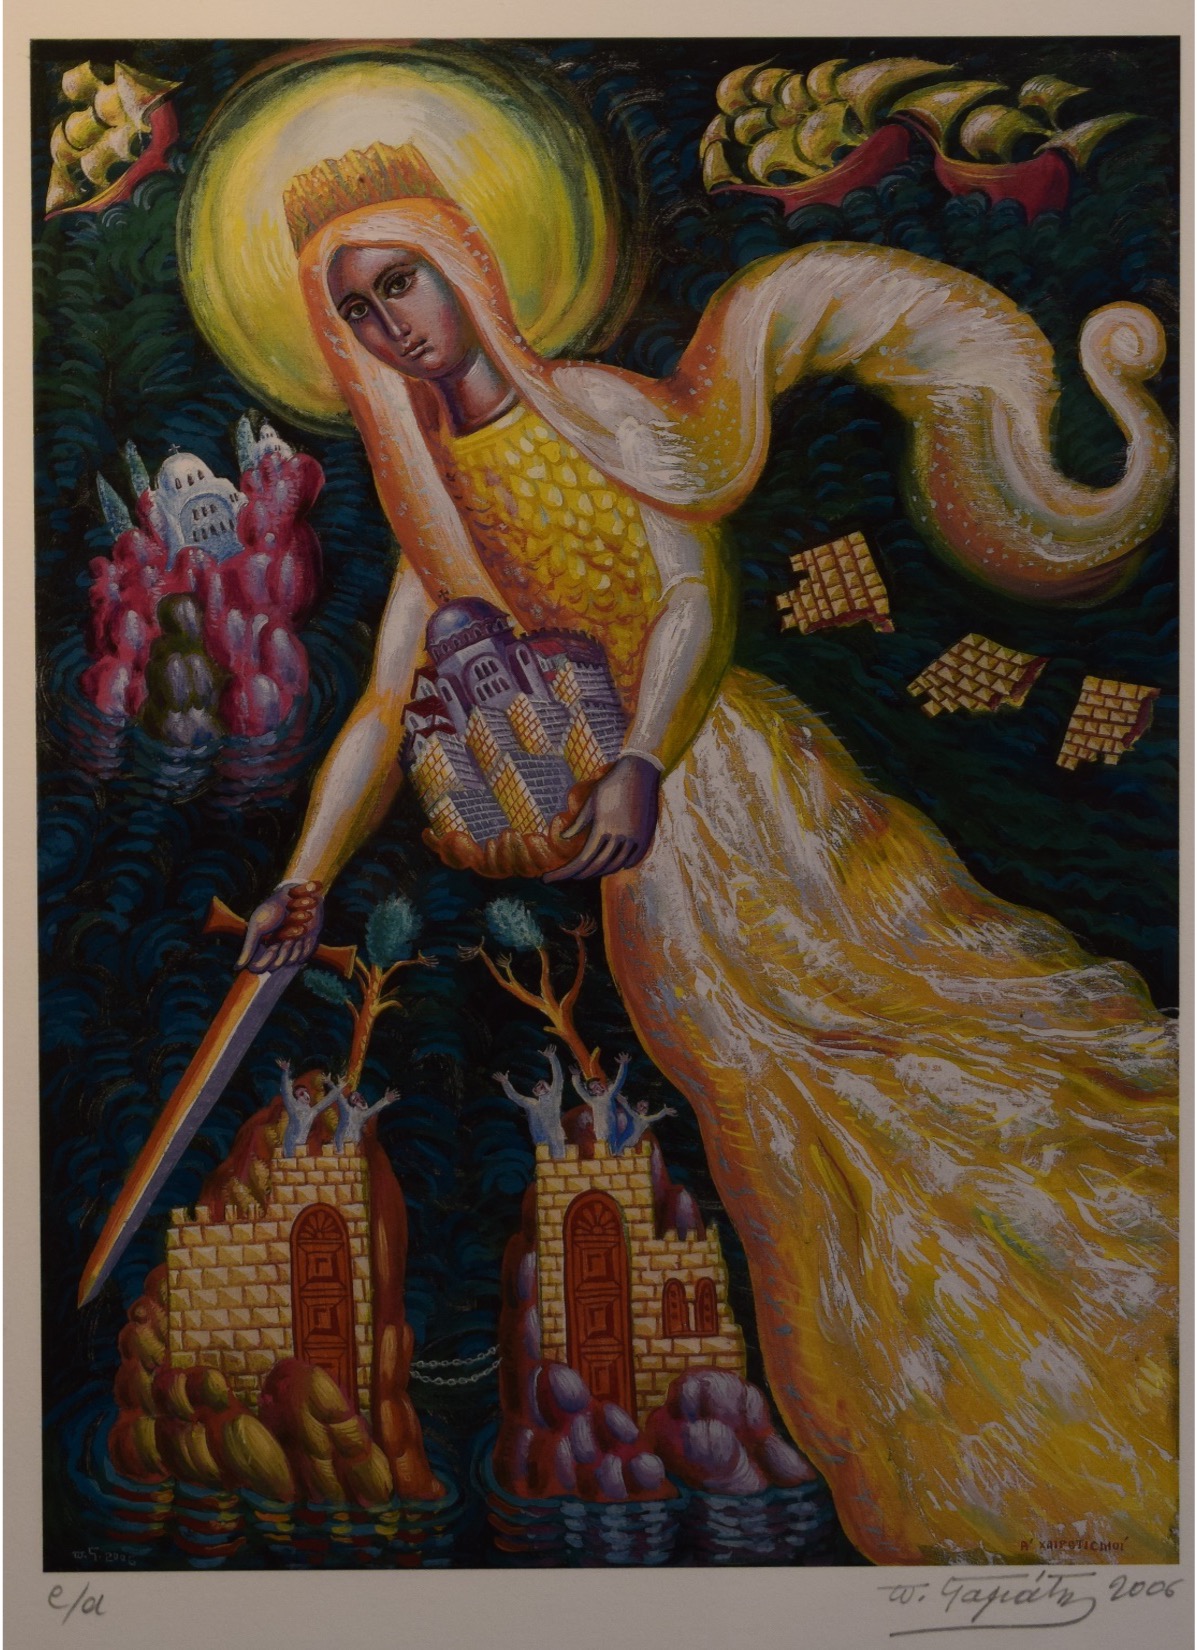 “First Greetings to the Panagia” acrylic on canvas, 2006, 20x27 Π90 - Α' ΧΑΙΡΕΤΙΣΜΟΊ, 2006, ακρυλικό σε μουσαμά, 20*27